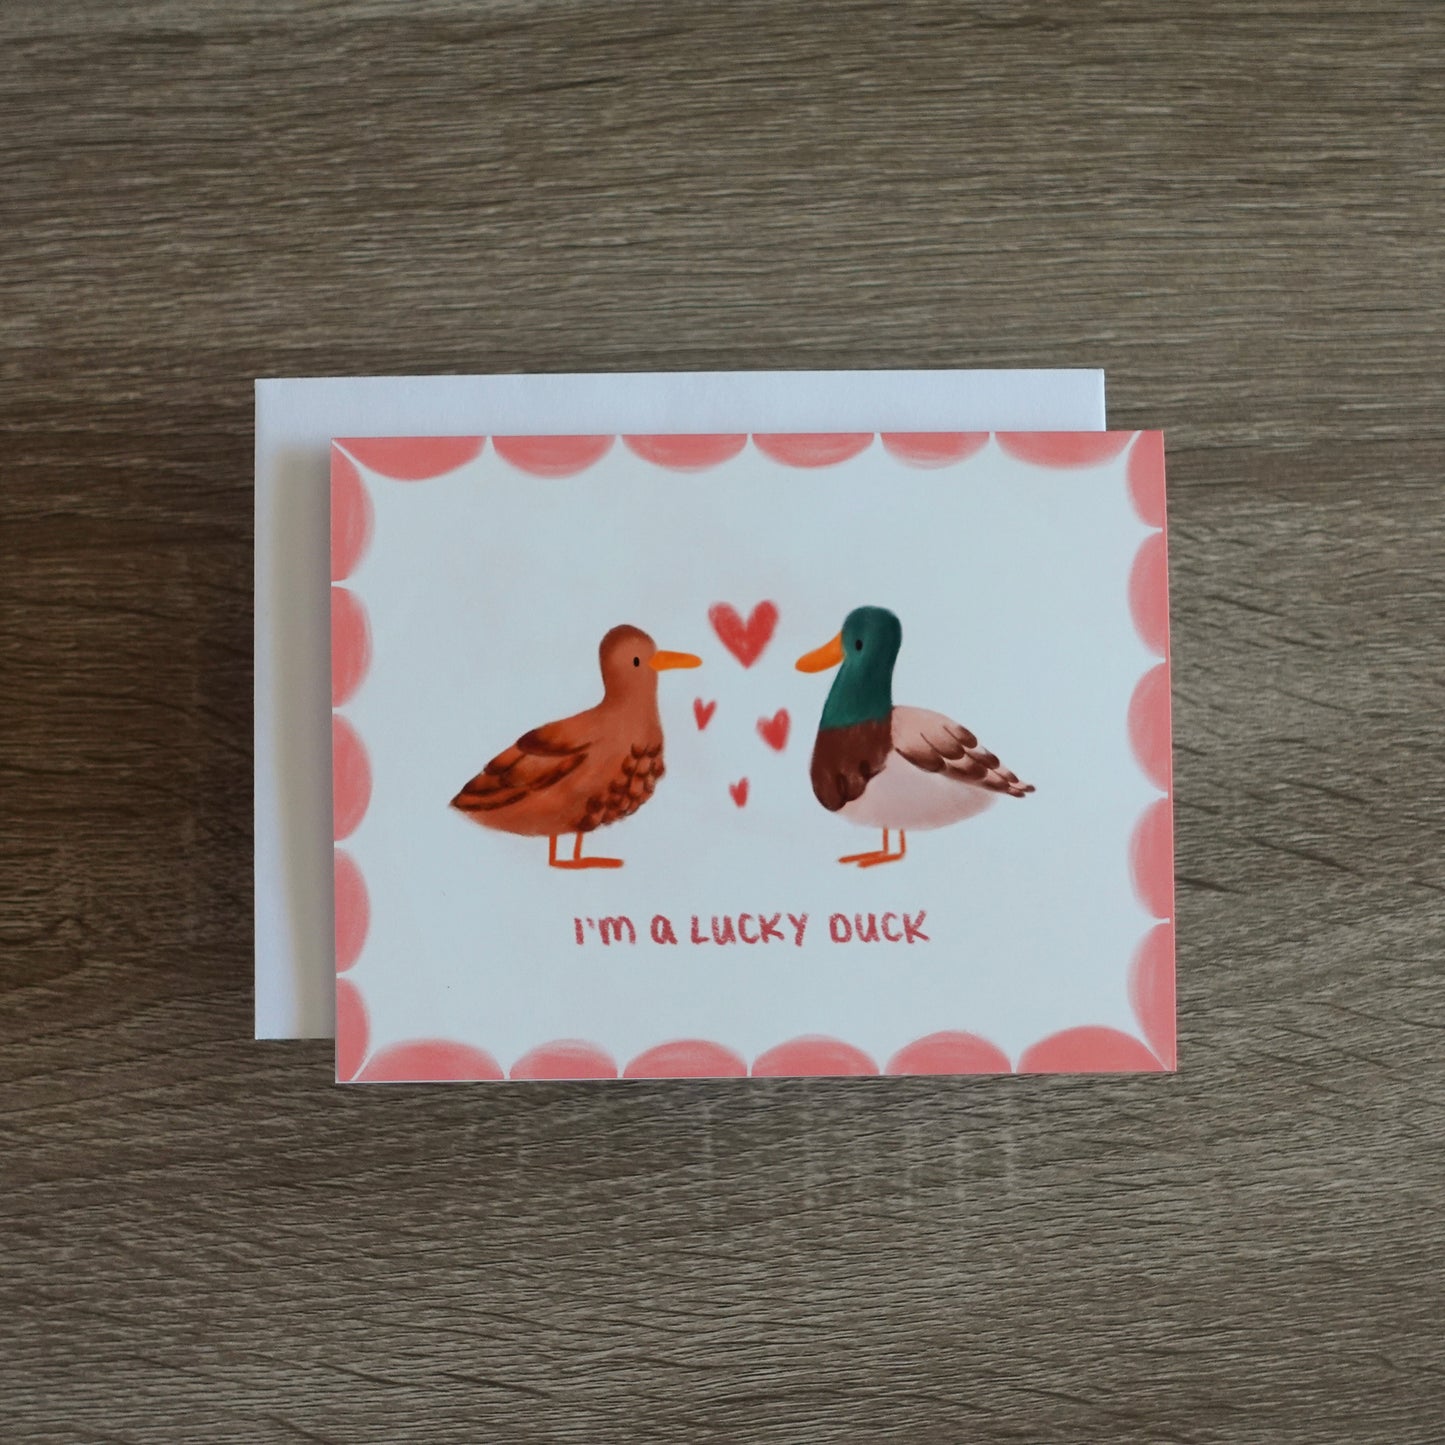 I'm a Lucky Duck - Love you / Anniversary / Valentines Card